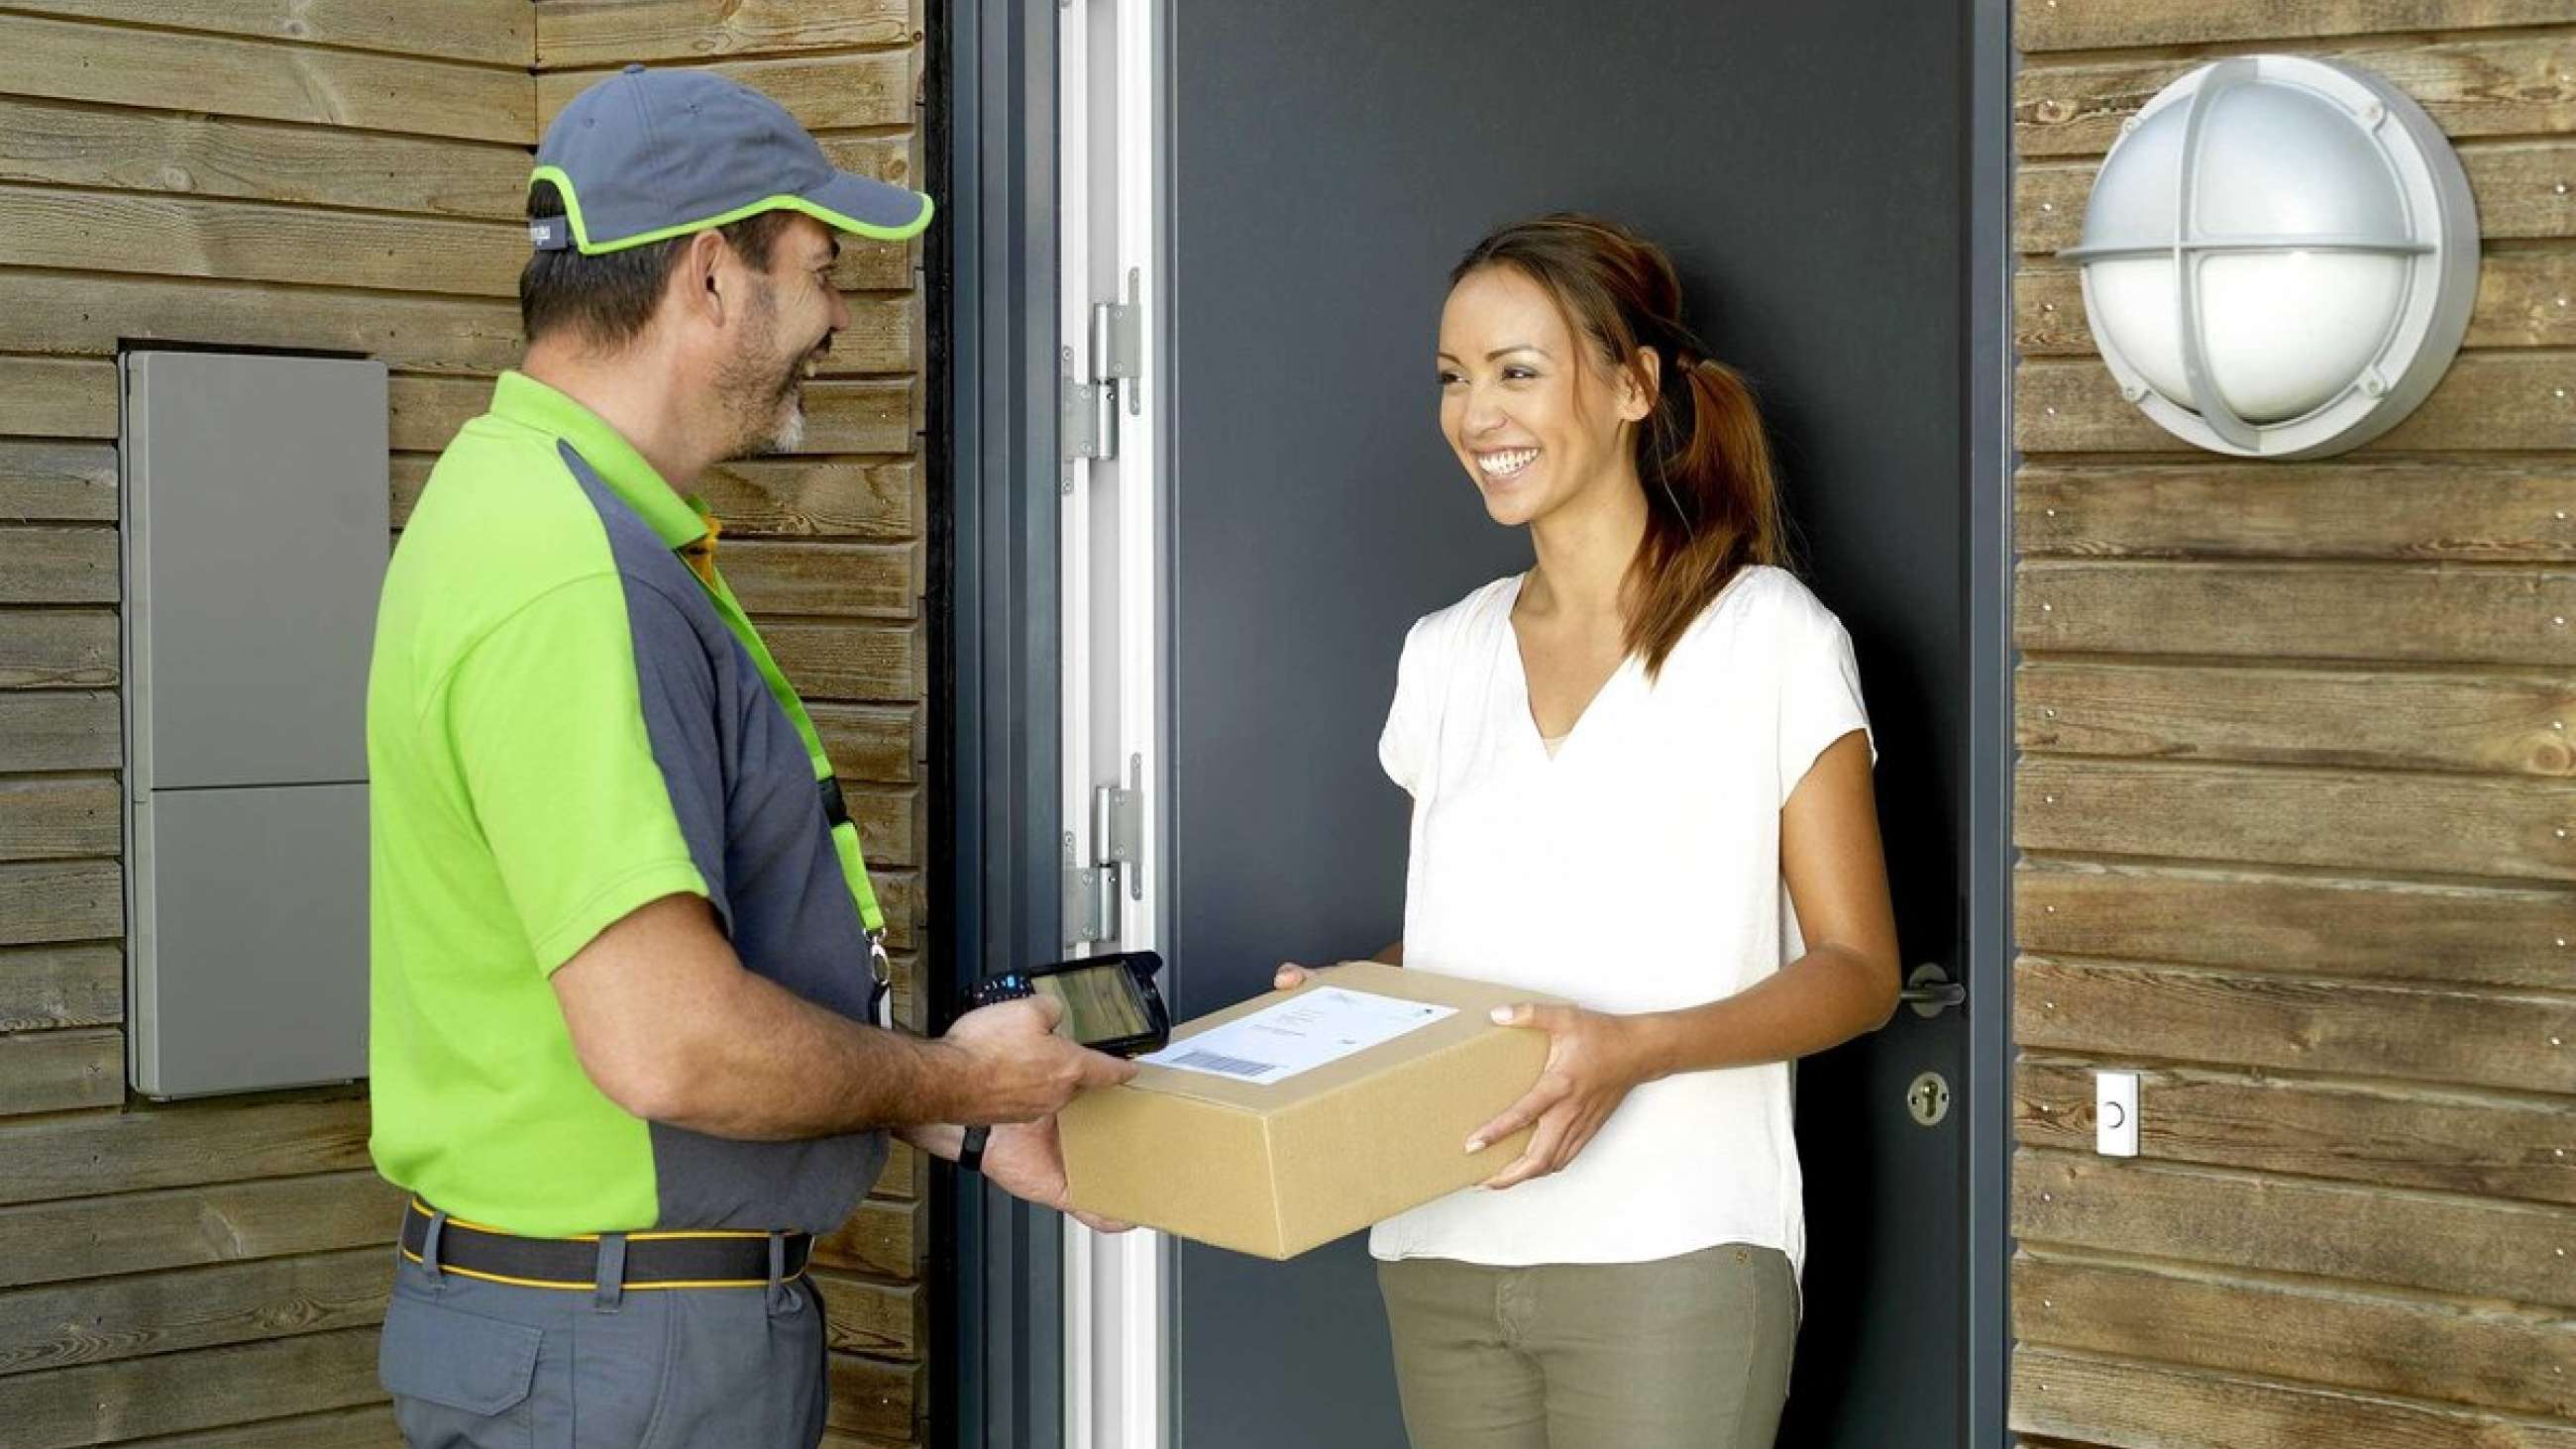 A Bring courier who delivers a parcel to a smiling person